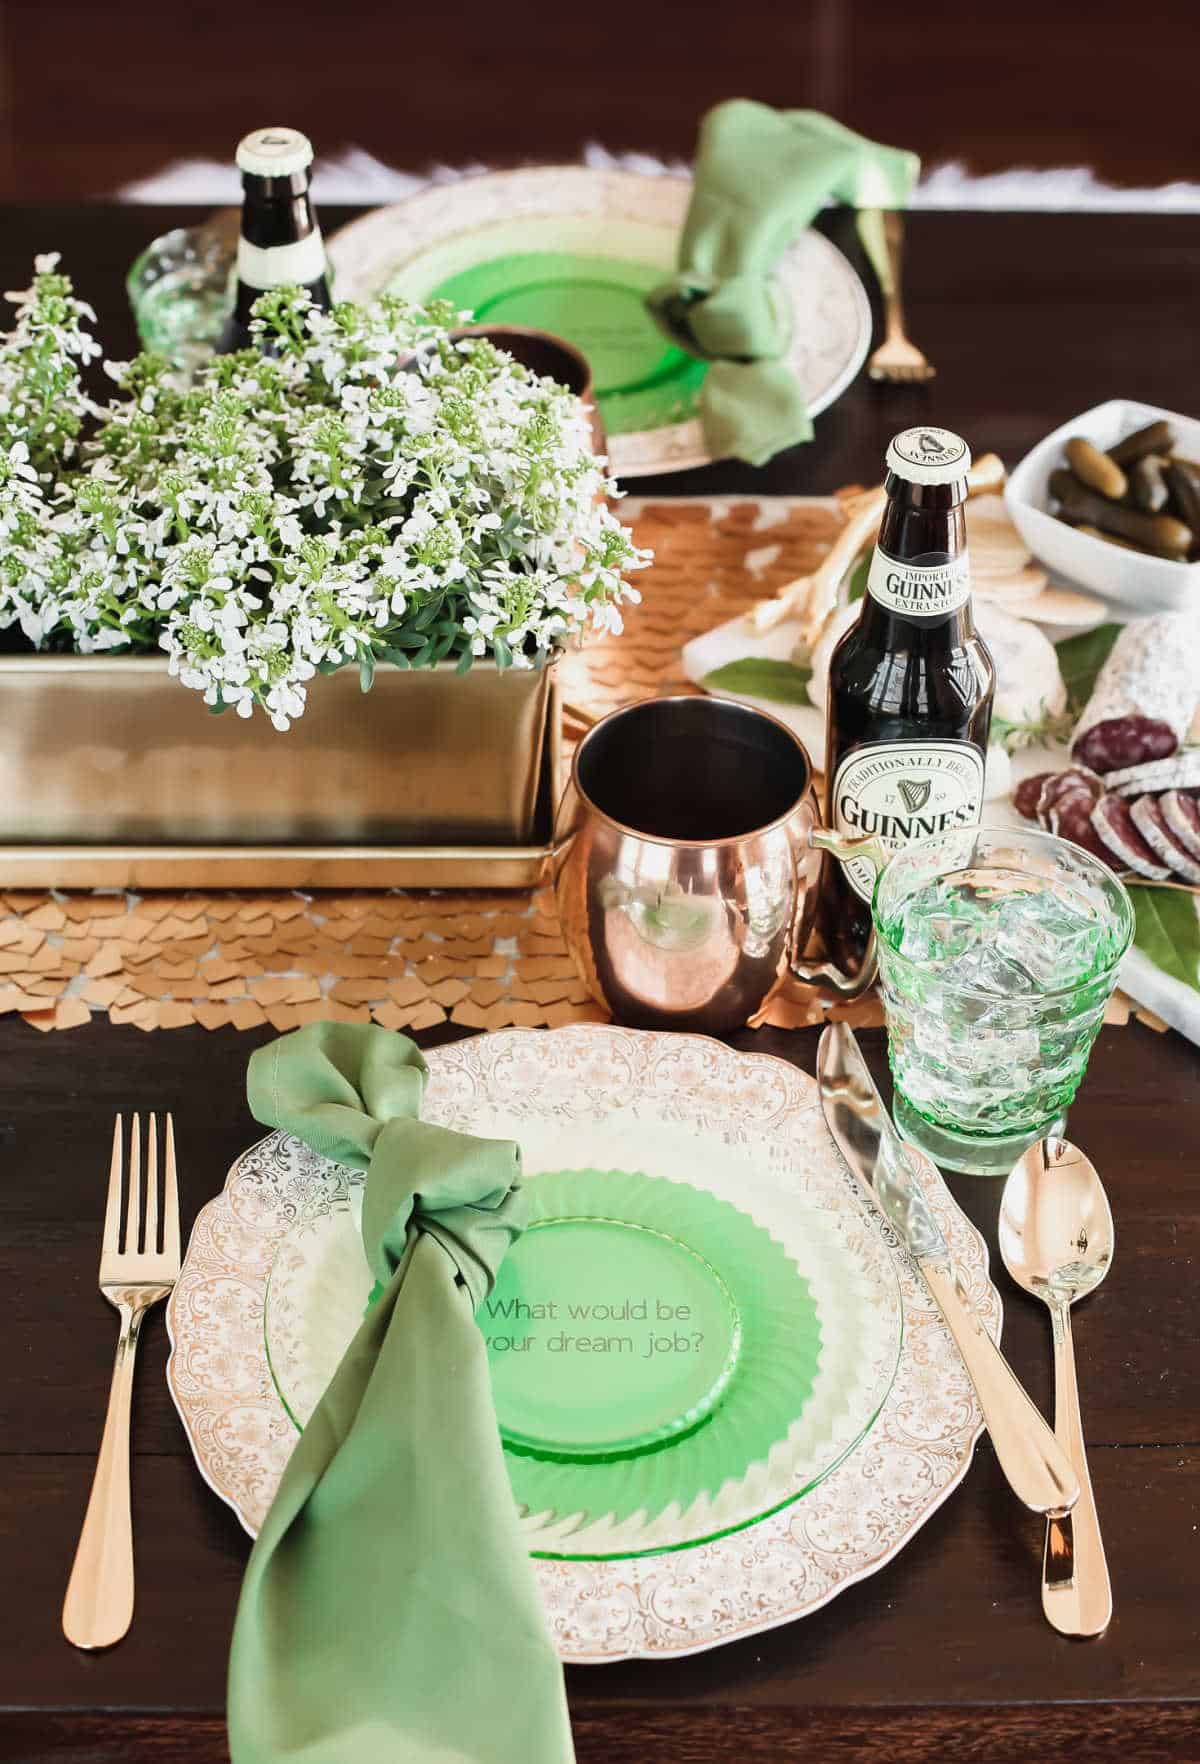 Irish theme dinner party table setting with green and gold decor.